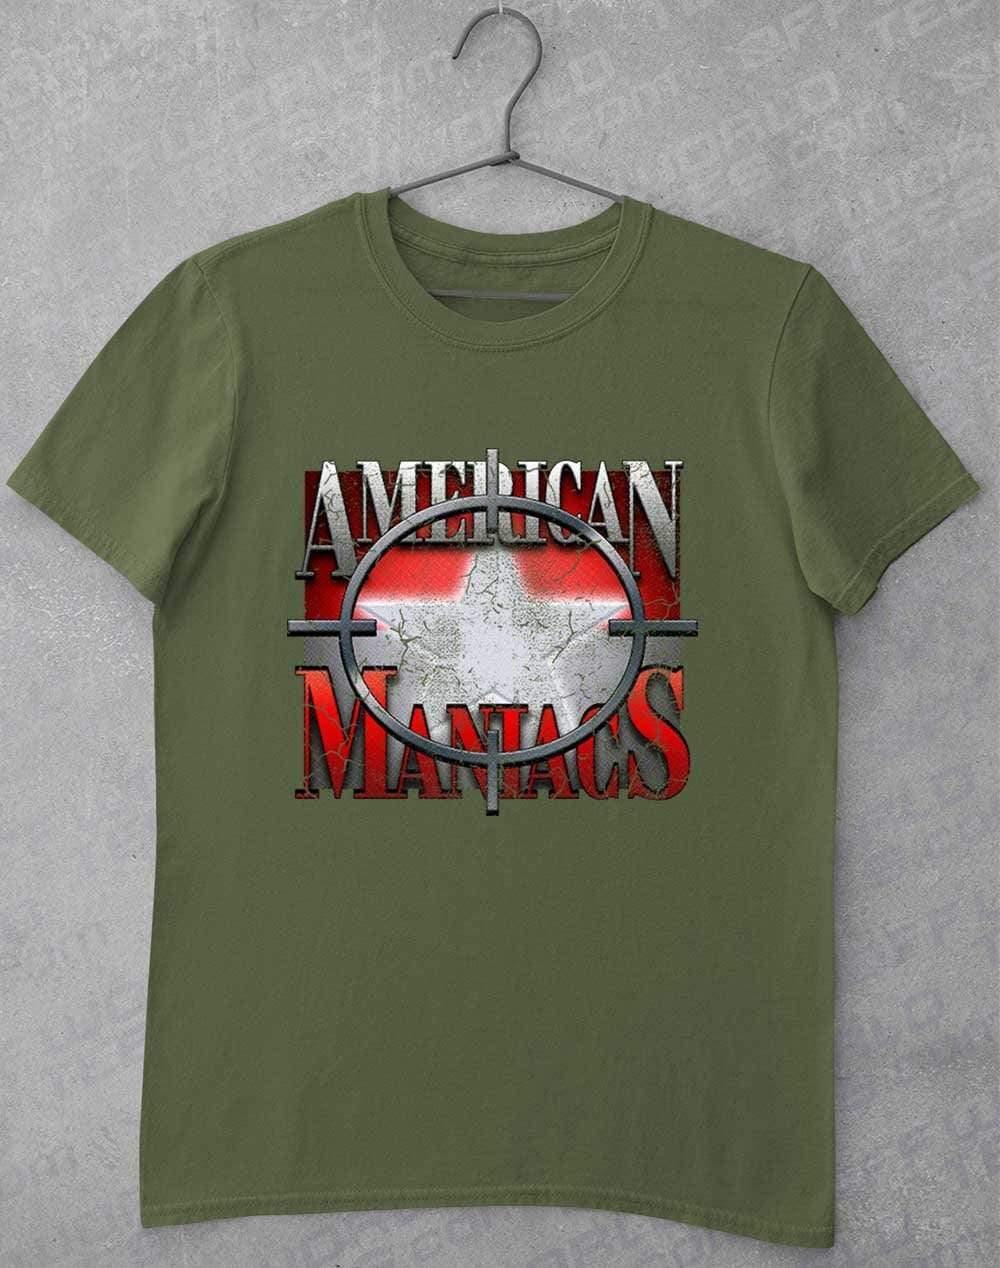 American Maniacs - T-Shirt S / Military Green  - Off World Tees